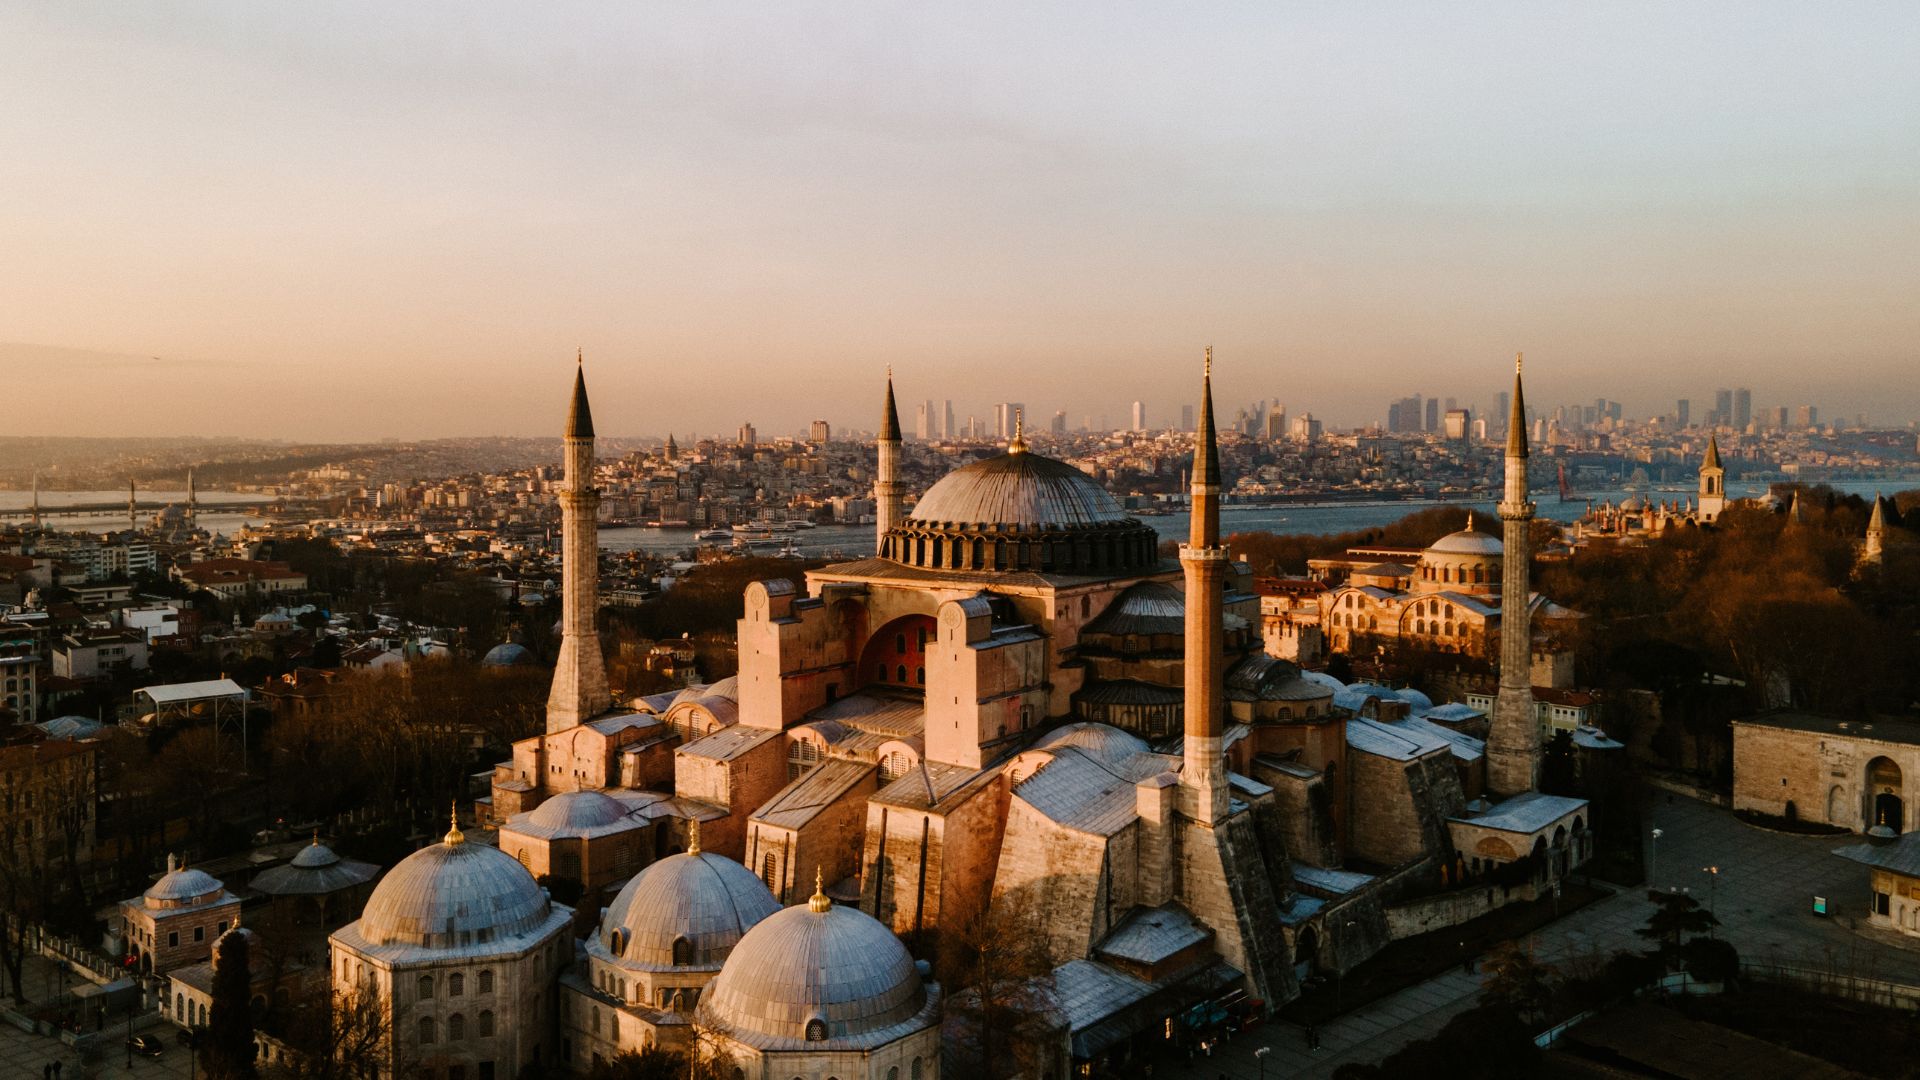 Merhaba! Welcome to the Istanbul Architecture Diary!